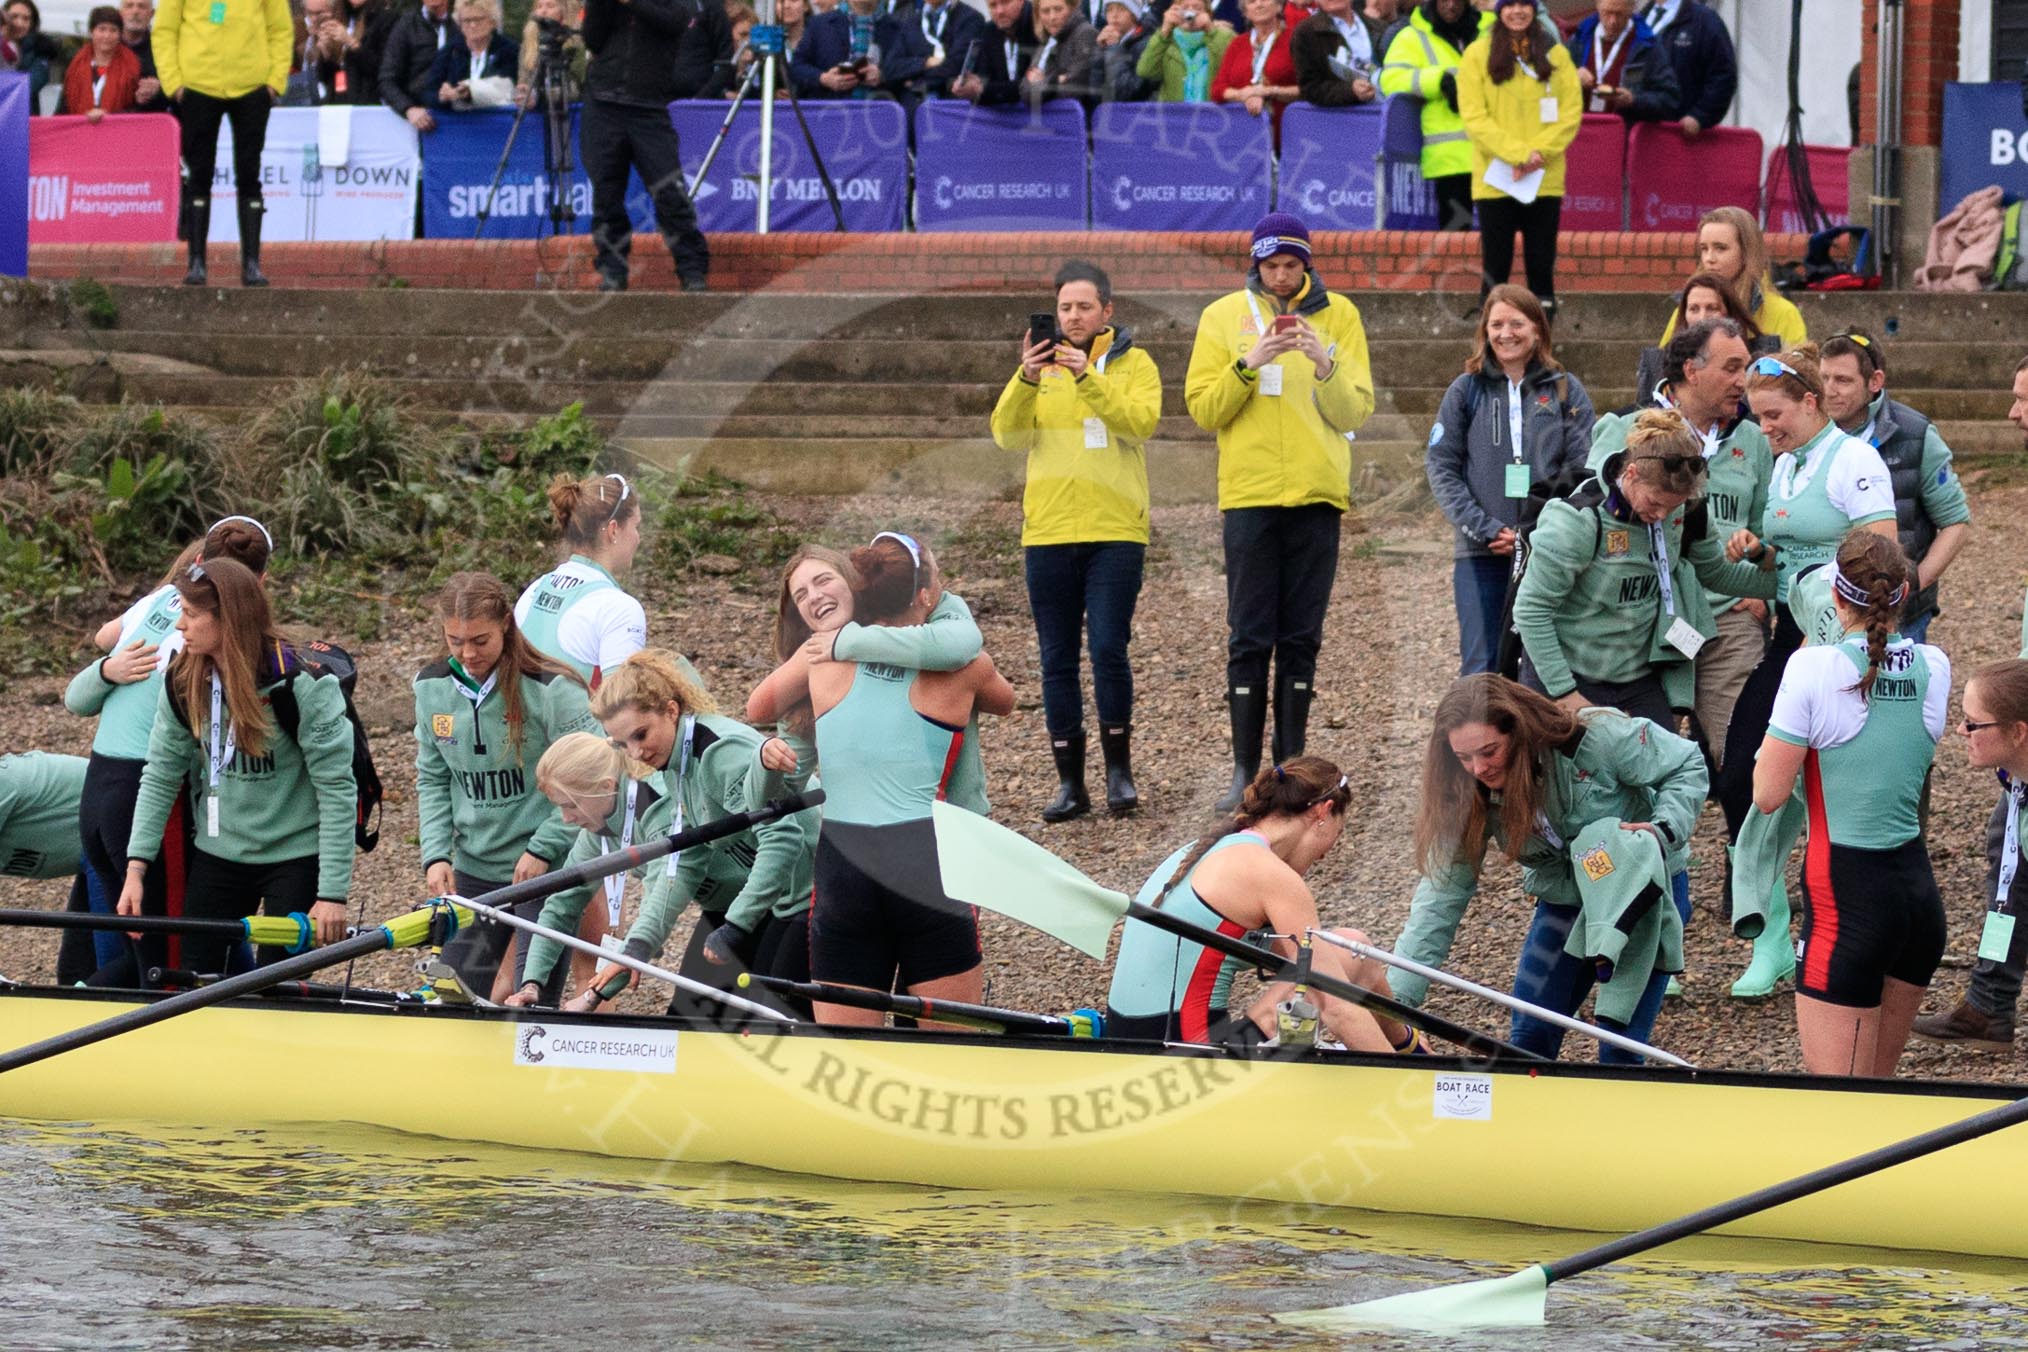 The Cancer Research UK Women's Boat Race 2018: The Cambridge women. having won the 2018 Women's Boat Race, arrive at Mortlake Boat Club.
River Thames between Putney Bridge and Mortlake,
London SW15,

United Kingdom,
on 24 March 2018 at 16:55, image #227